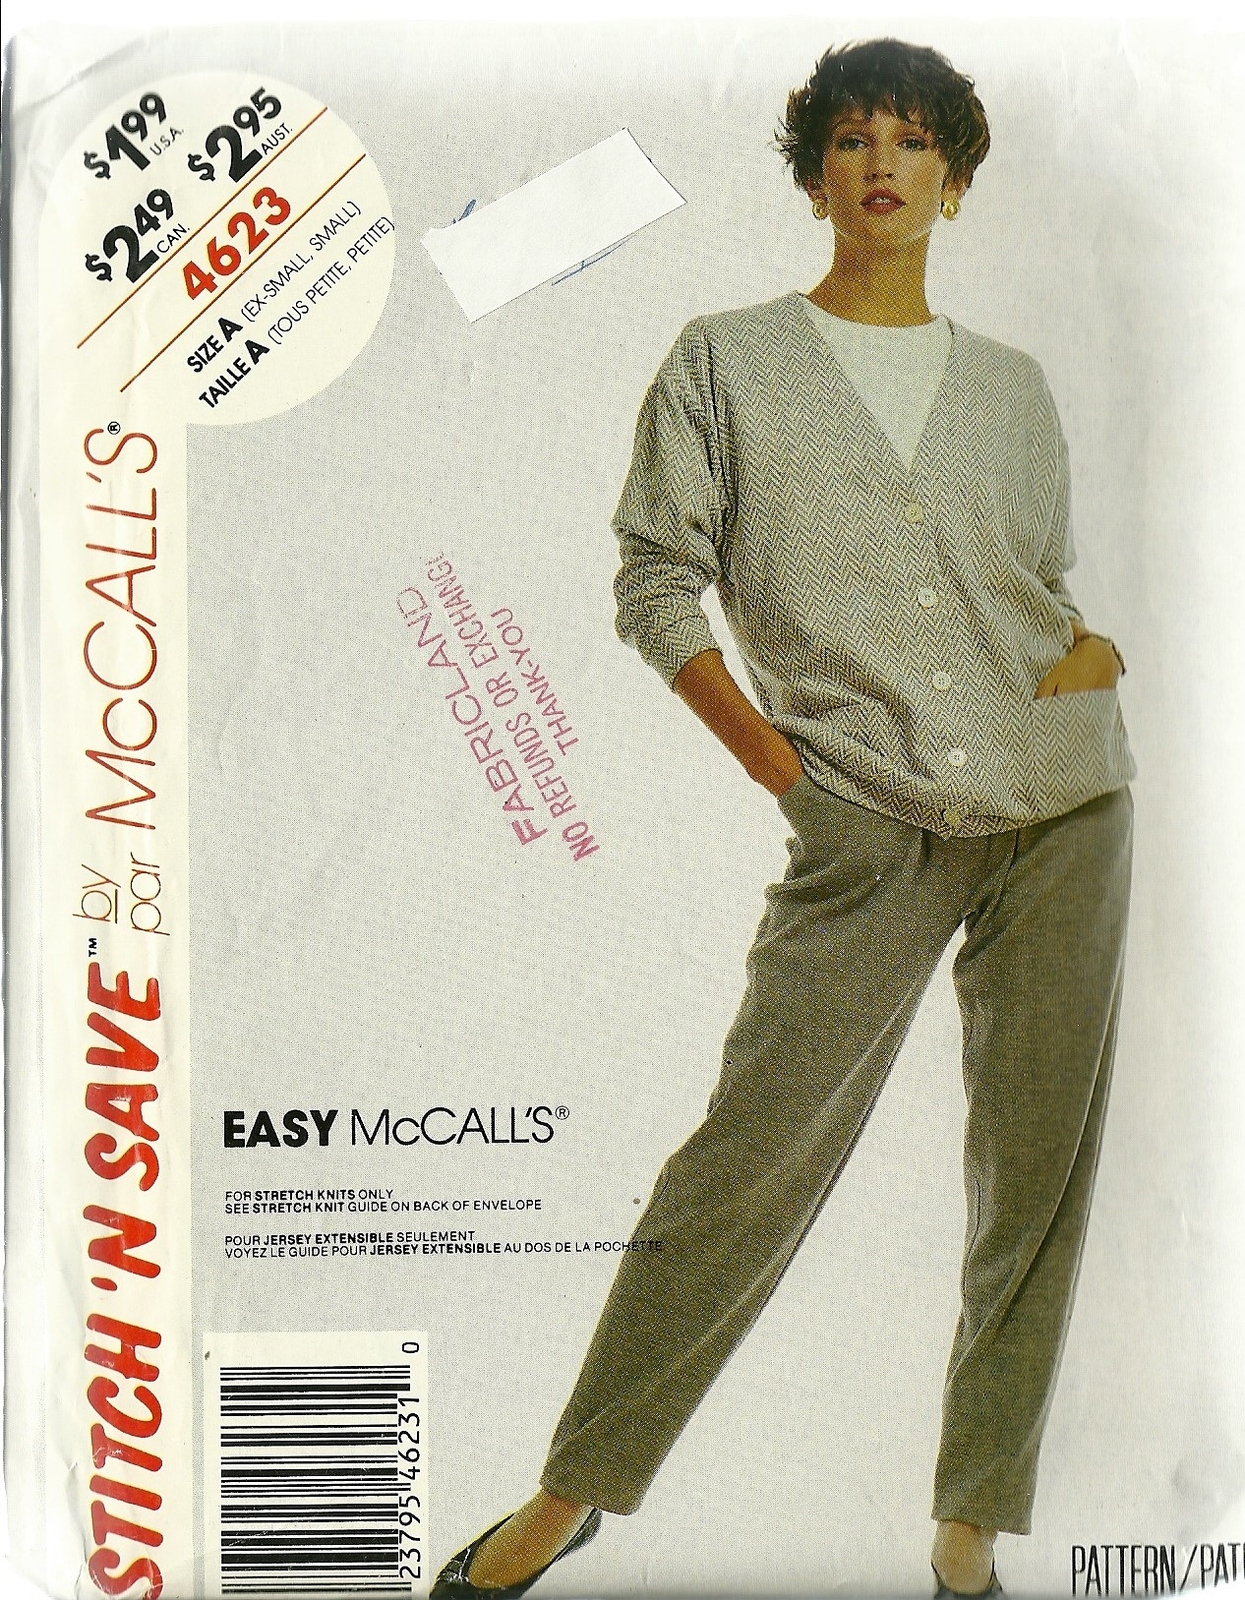 McCall's Sewing Pattern 4623 Misses Womens Cardigan Sweater Pants 6 8 10 12 New - $9.99